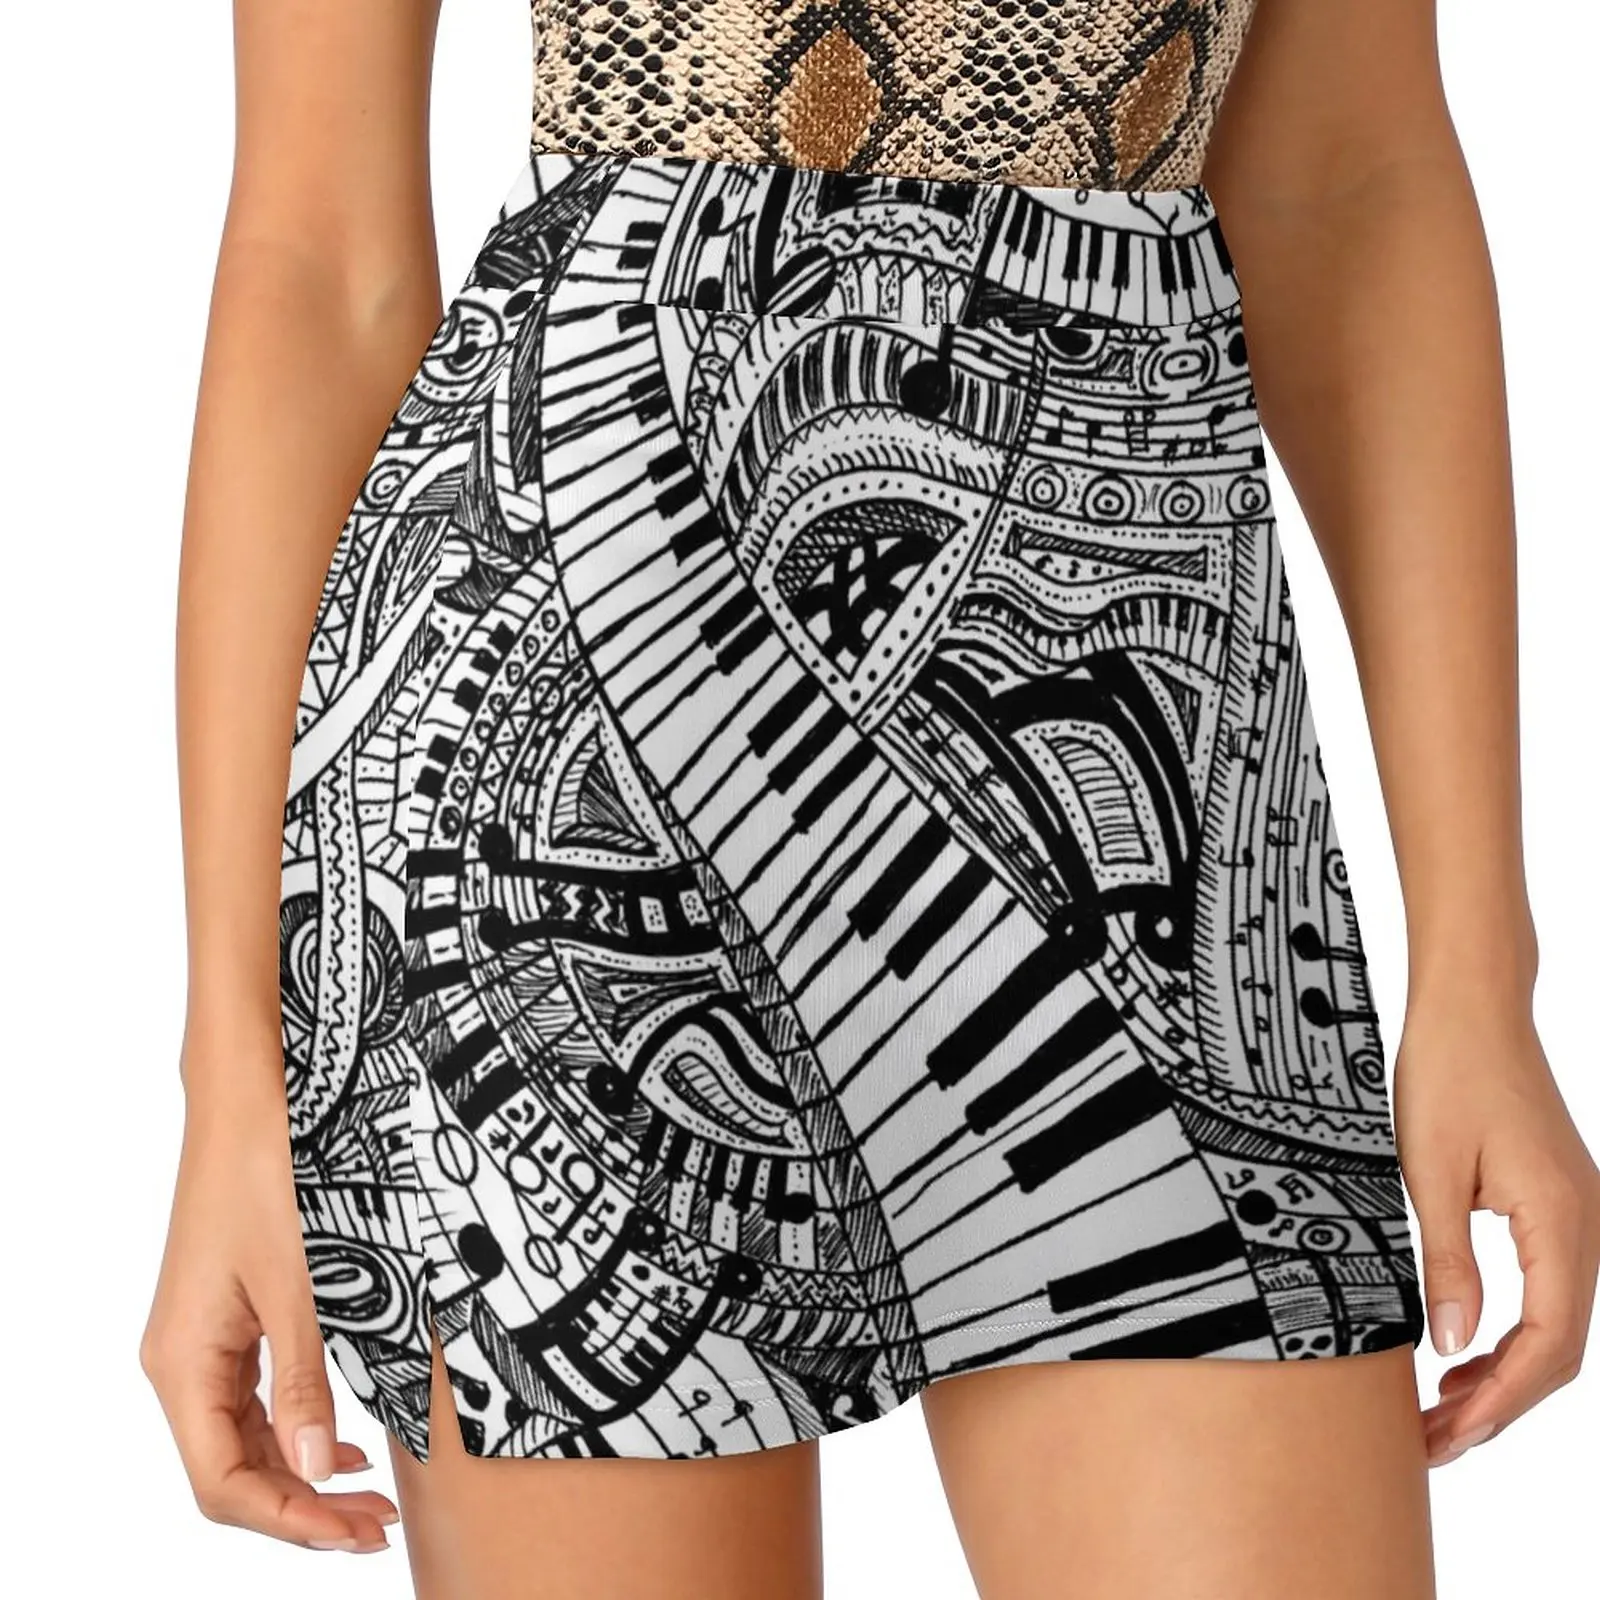 Classical music doodle with piano keyboard Light Proof Trouser Skirt novelty in clothes festival outfit women extreme mini dress